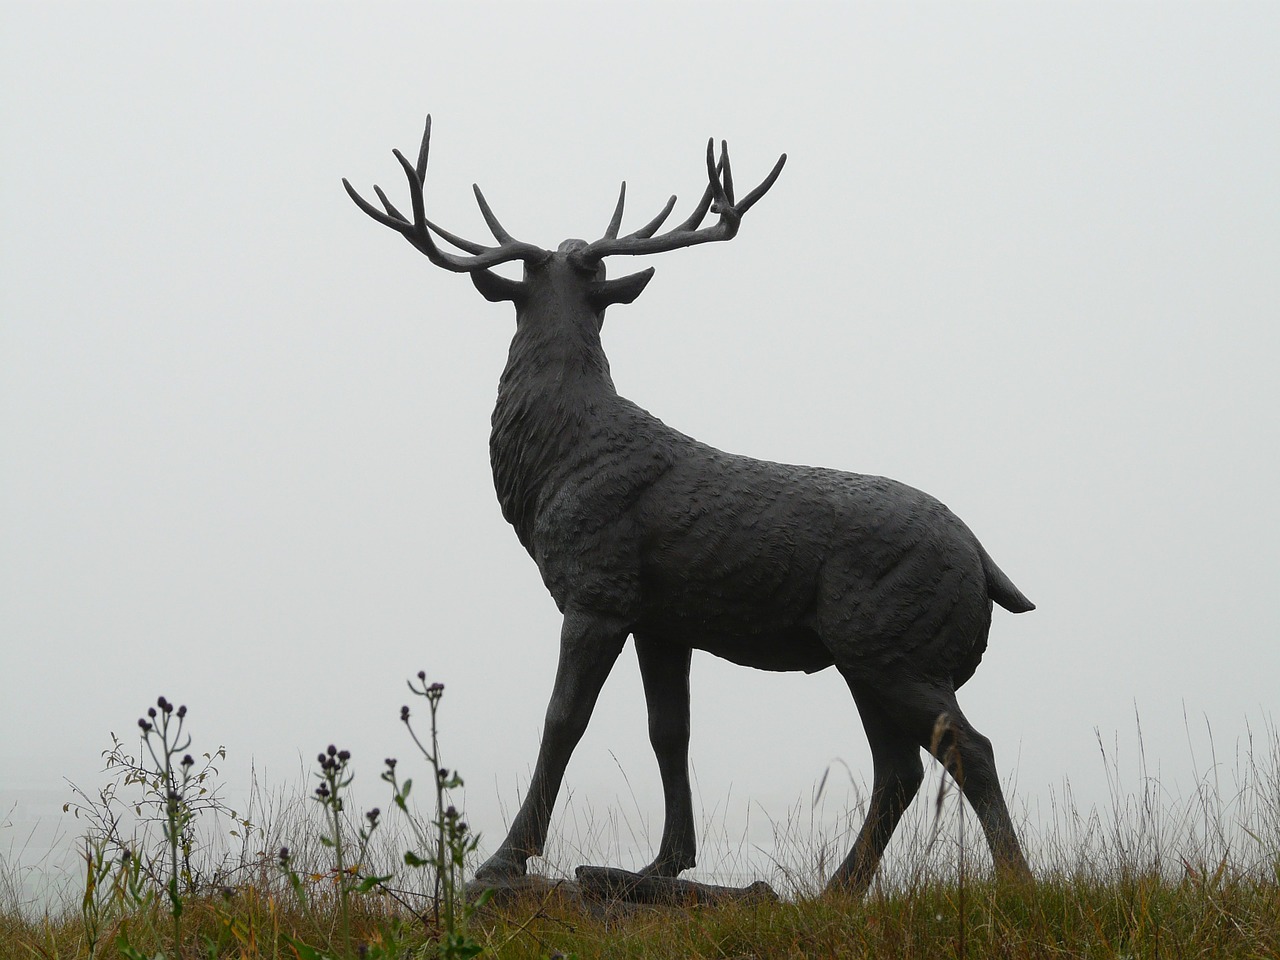 red deer,bronze statue,hirsch,cervidae,antler carrier,paarhufer,artiodactyla,cast iron,antler,pipe,fog,free pictures, free photos, free images, royalty free, free illustrations, public domain